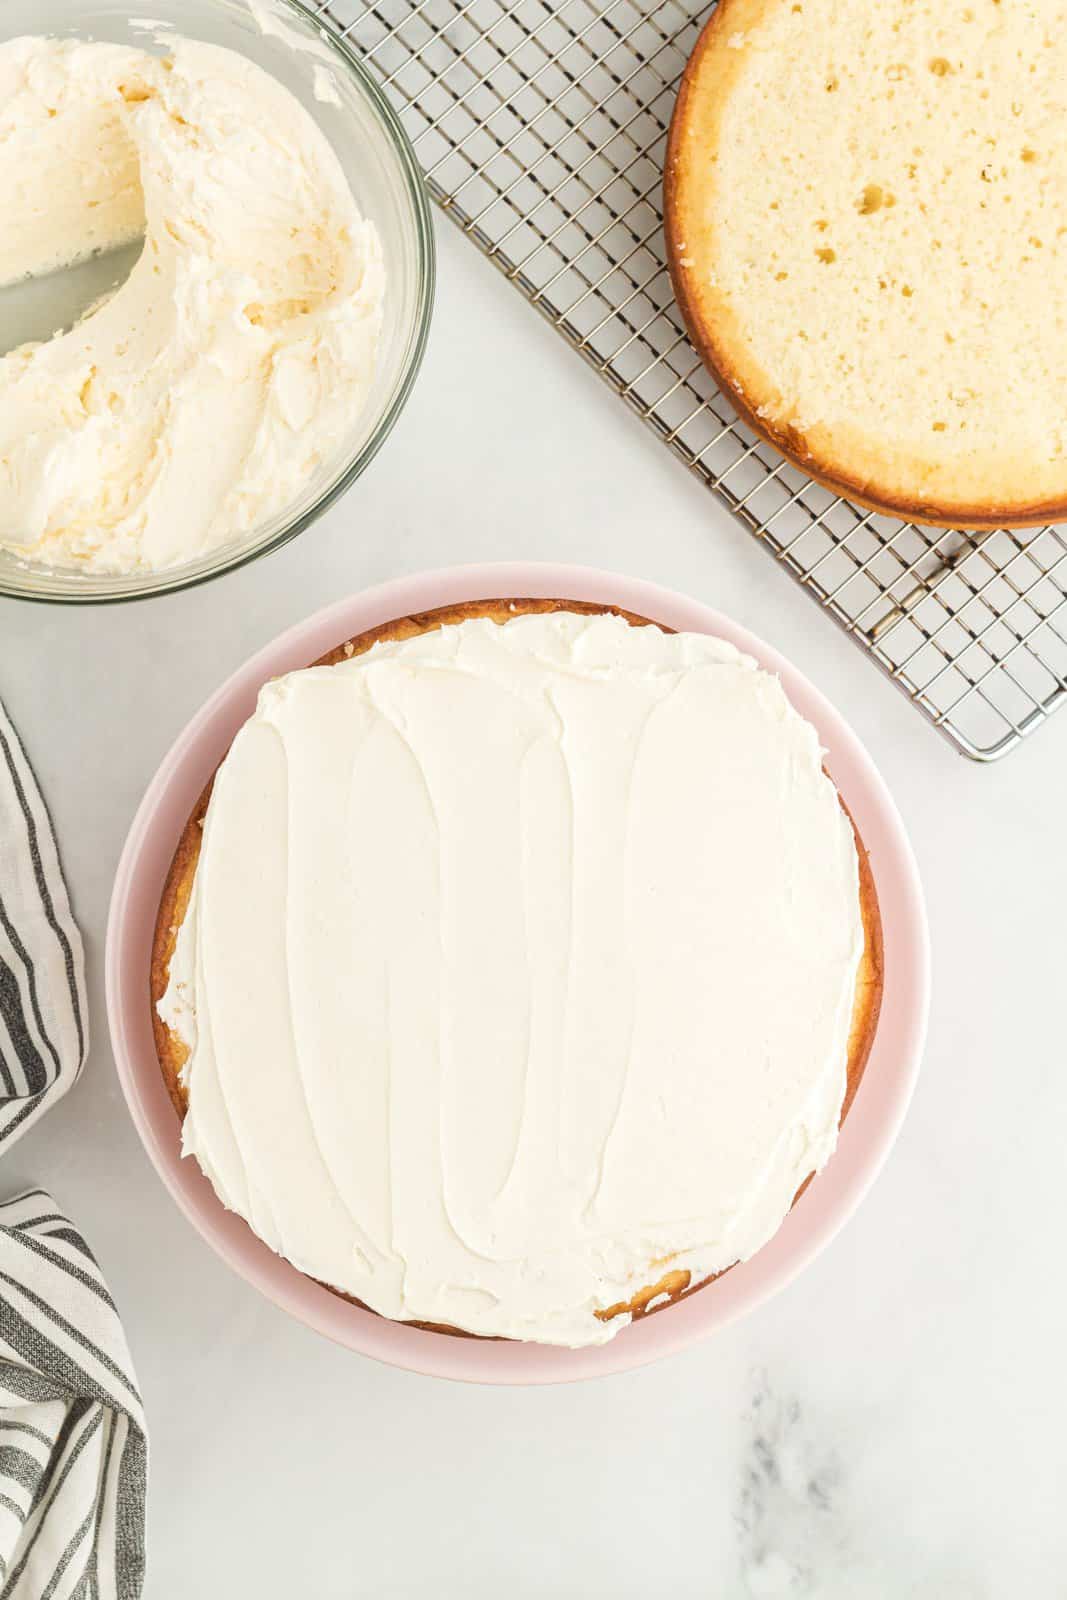 A white cake with homemade frosting on top.